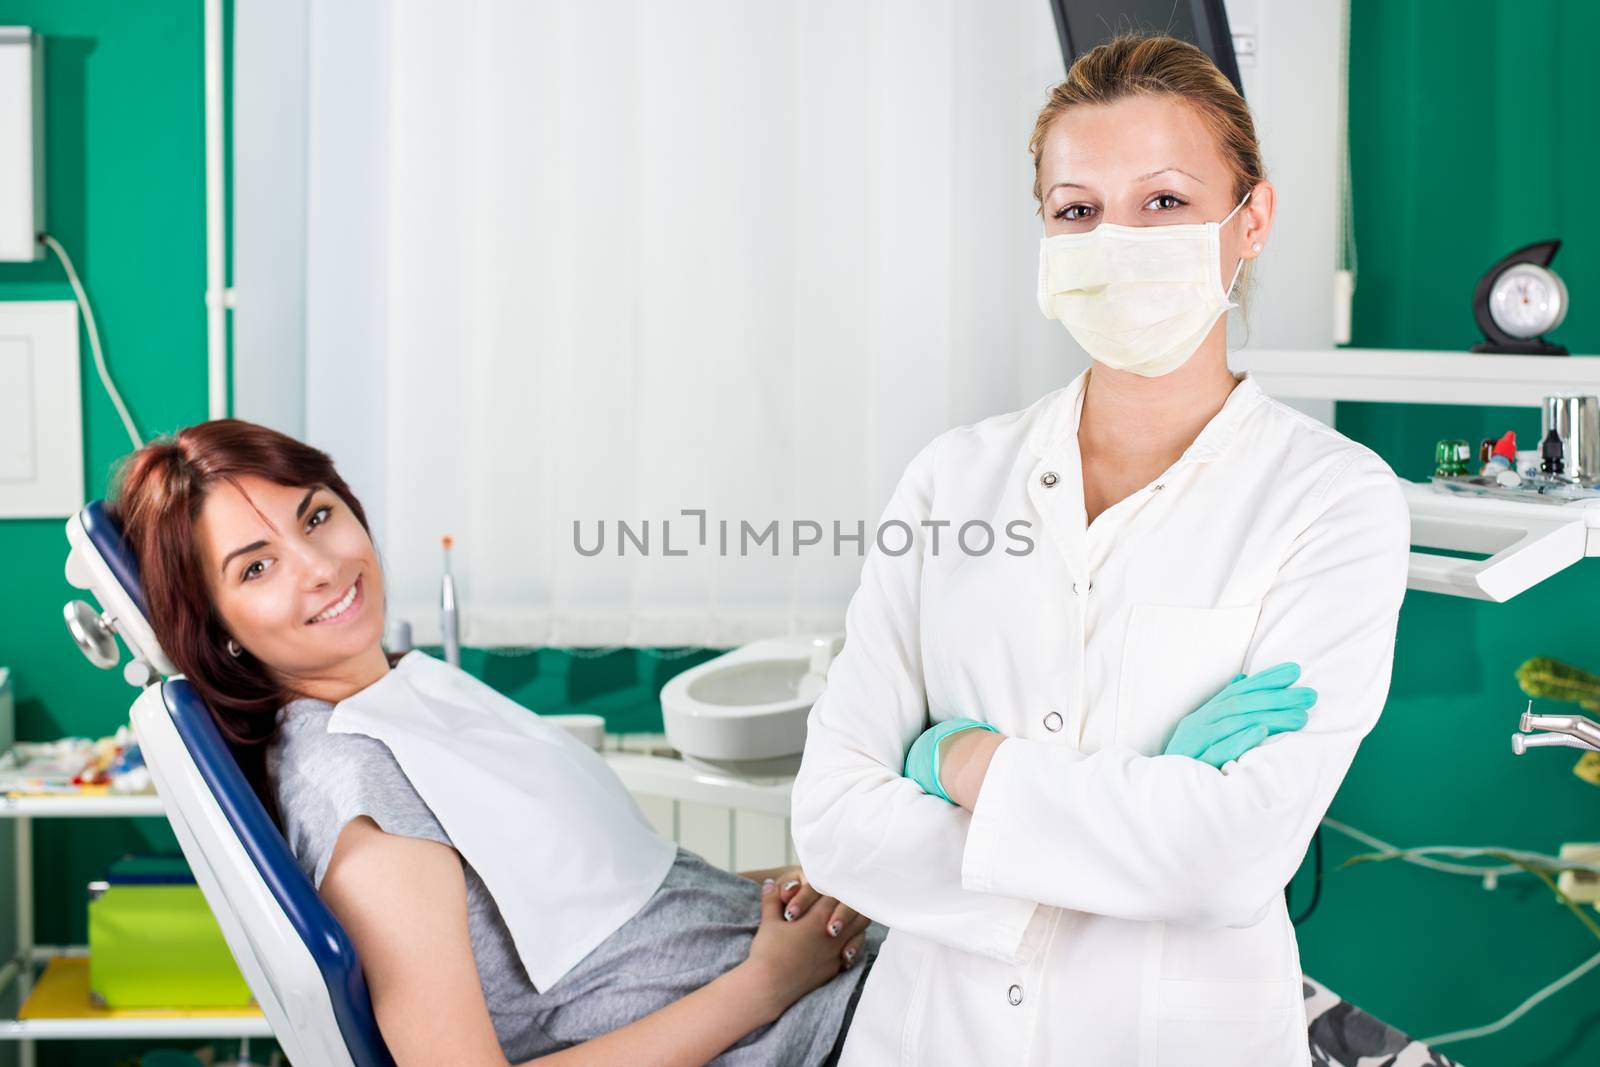 Smiling Woman At Dentist by MilanMarkovic78